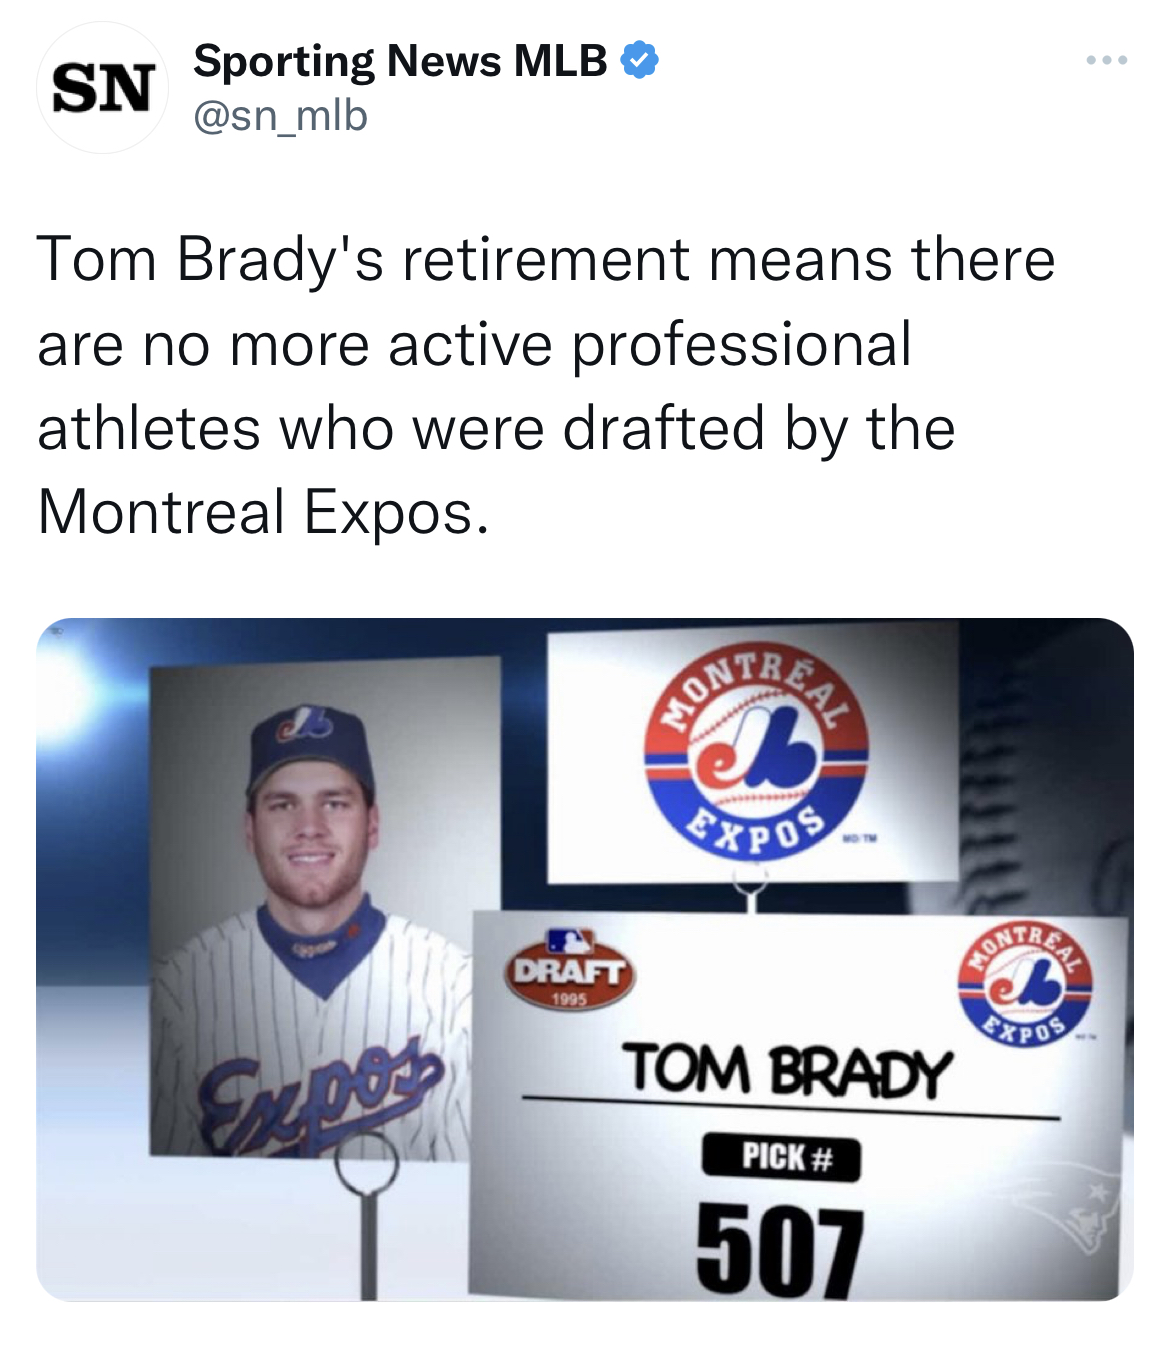 Tom Brady Retirement memes - montreal expos - Sn Sporting News Mlb dy's retirement means there are no more active professional athletes who were drafted by the Montreal Expos. Expos Draft ab Mont Tom Brady Pick # 507 Achty A